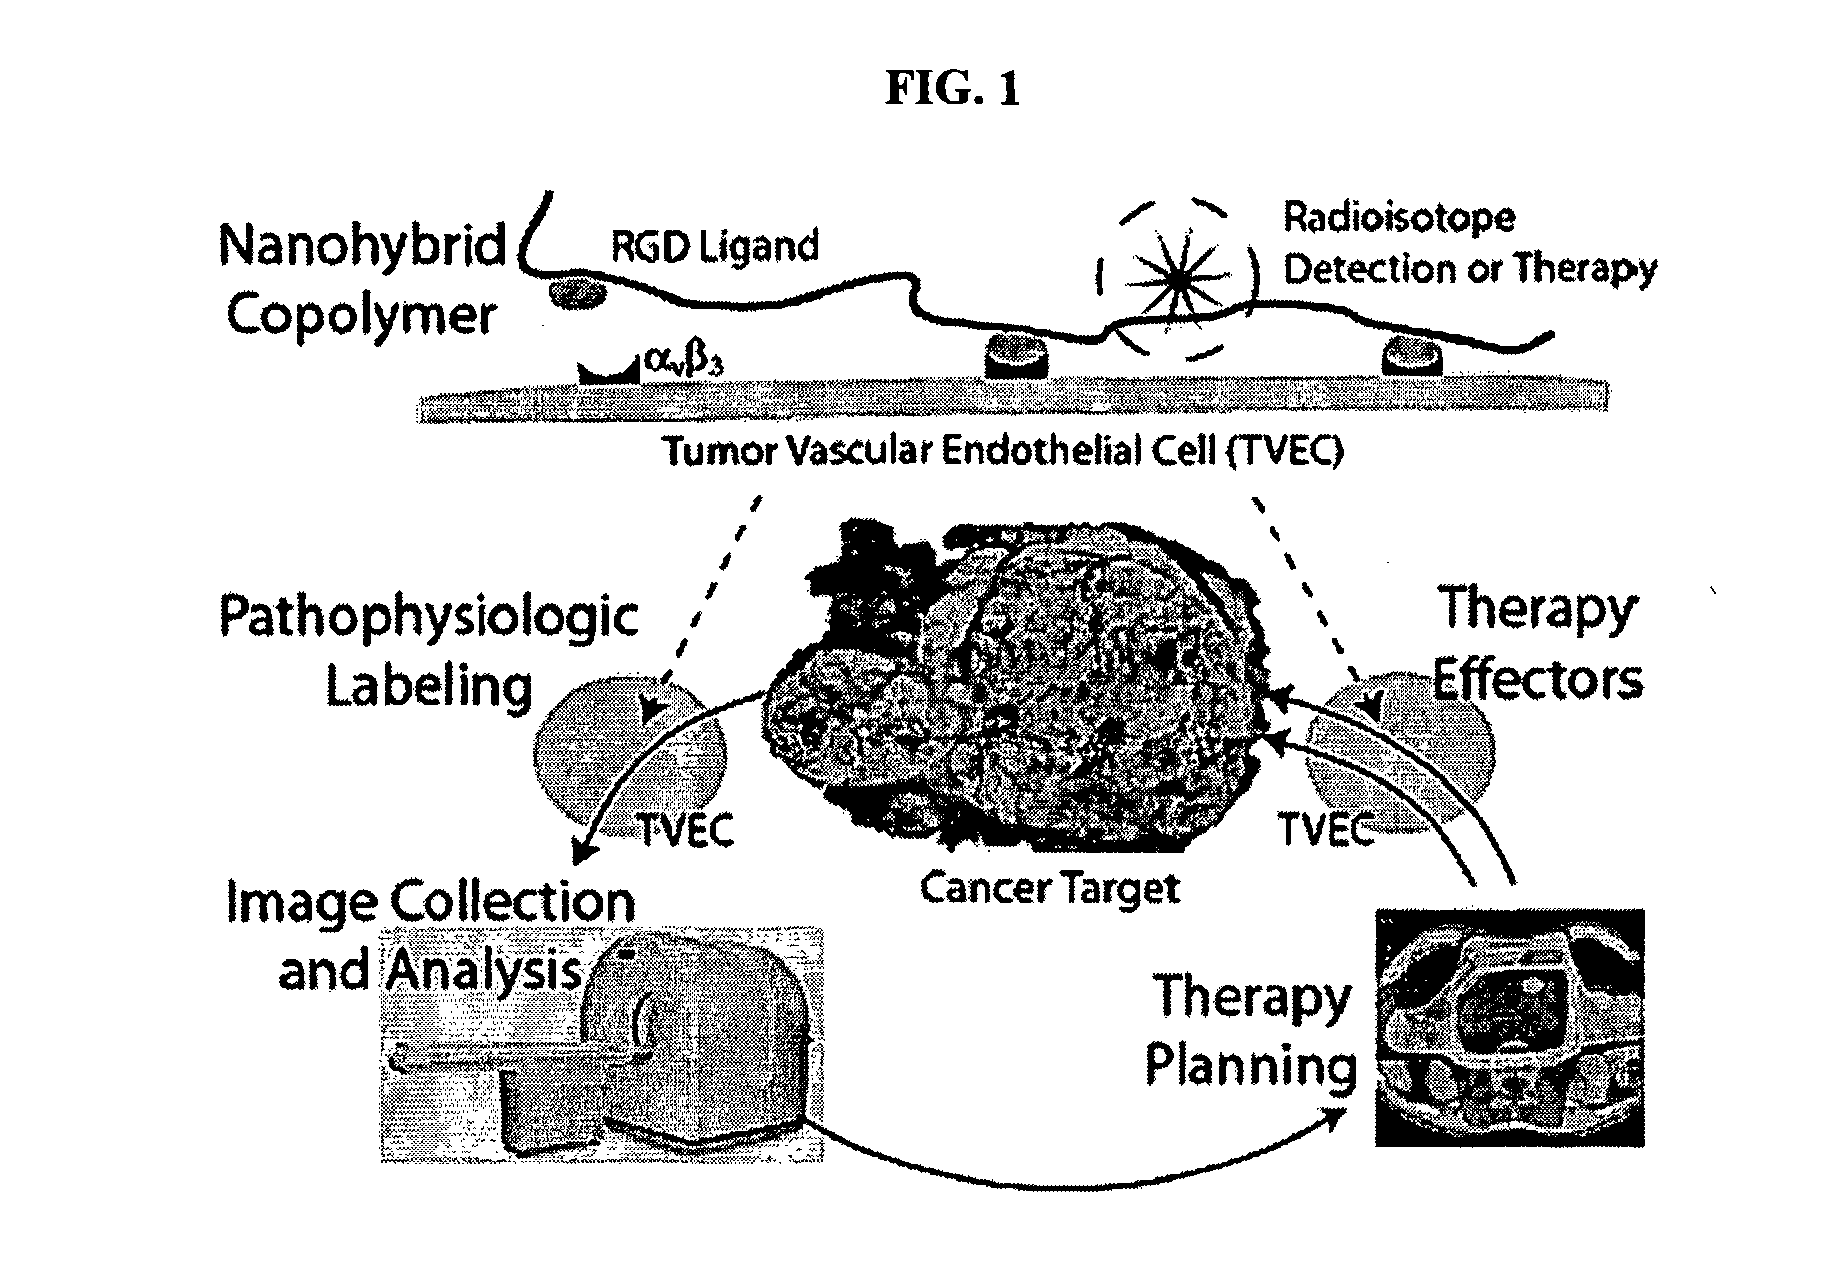 Radiolabeled Nanohybrids Targeting Solid Tumor Neovasculature and Method of Using Same